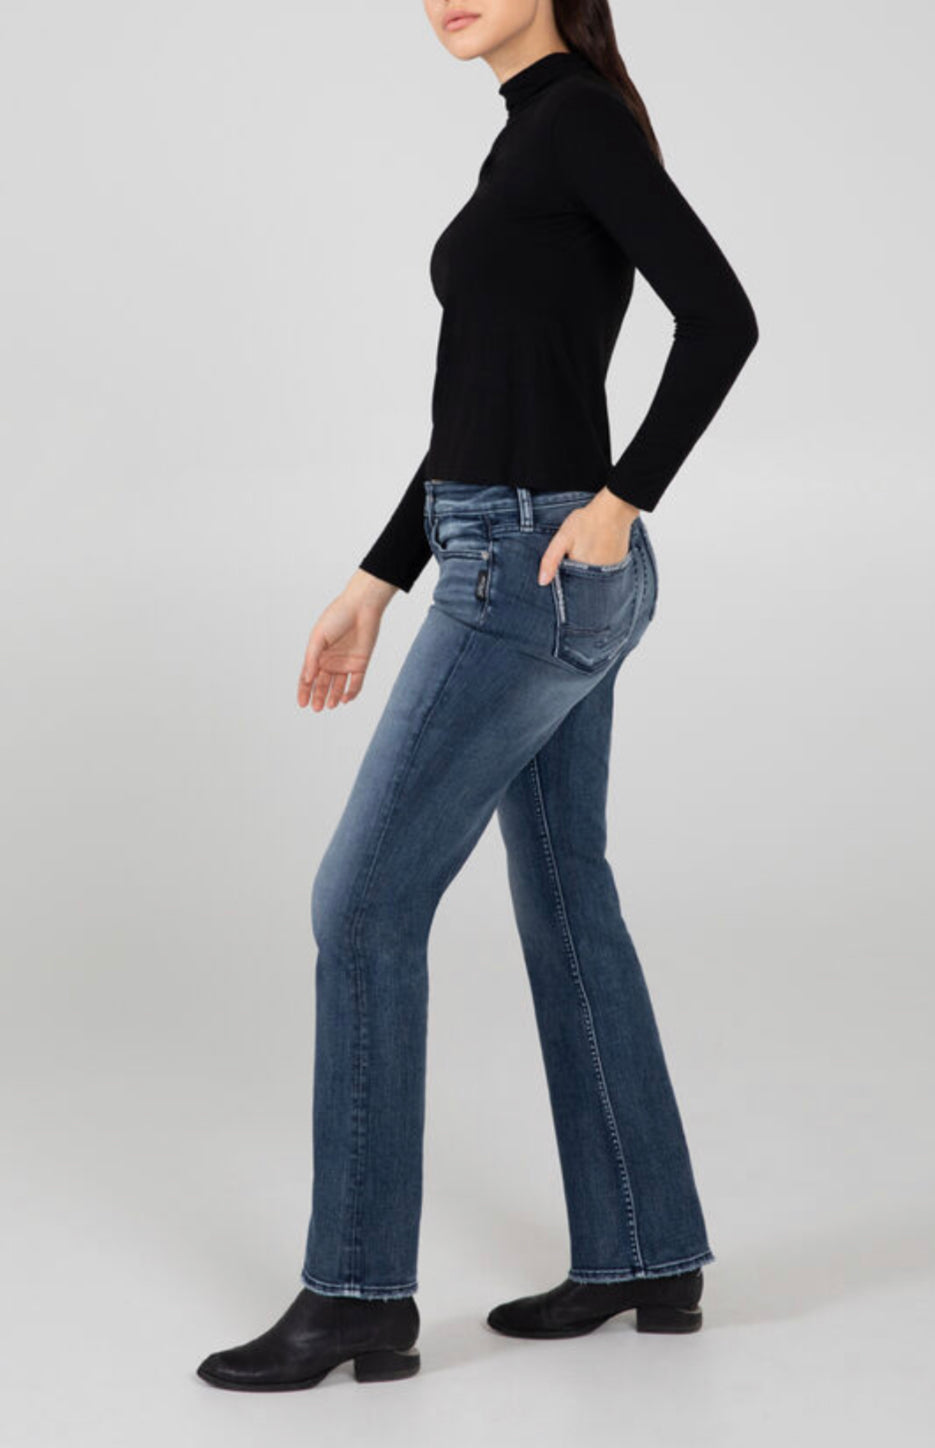 Silver Elyse Mid Rise Slim Bootcut Jeans-Bootcut-Silver Jeans-Gallop 'n Glitz- Women's Western Wear Boutique, Located in Grants Pass, Oregon